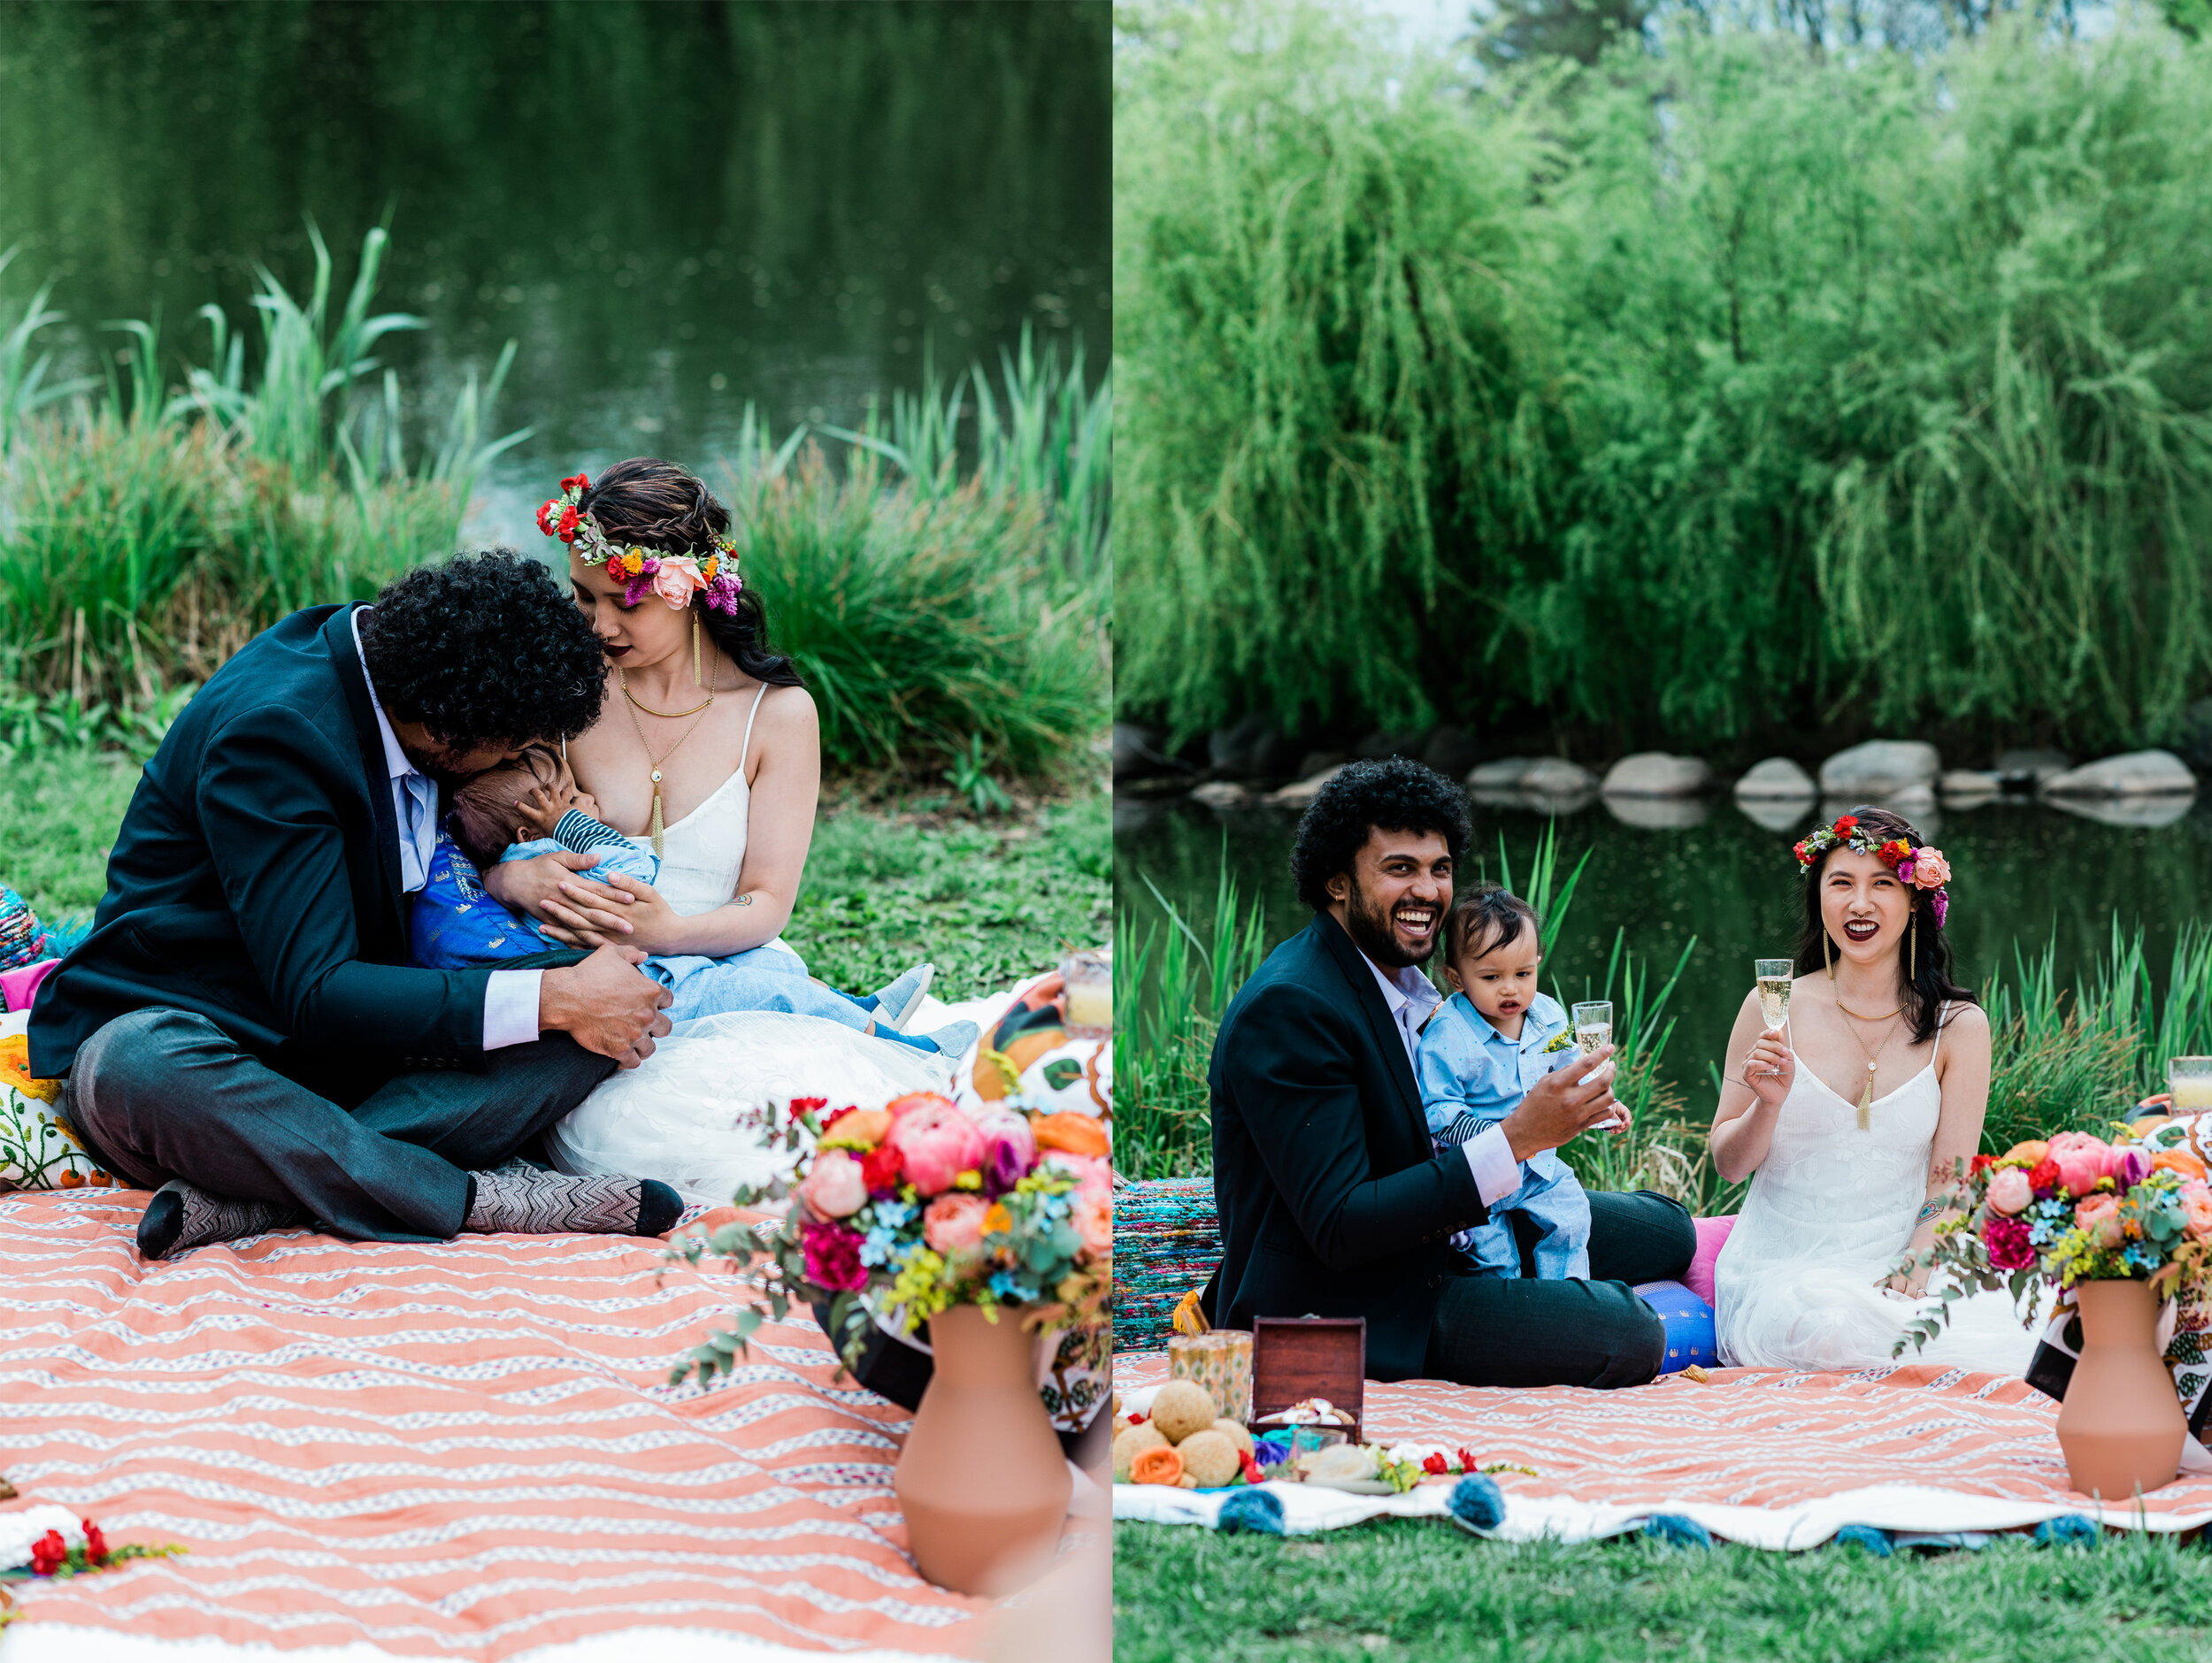 bride and groom enjoying Prosecco on the wedding picnic blanket along with their toddler son (Copy)